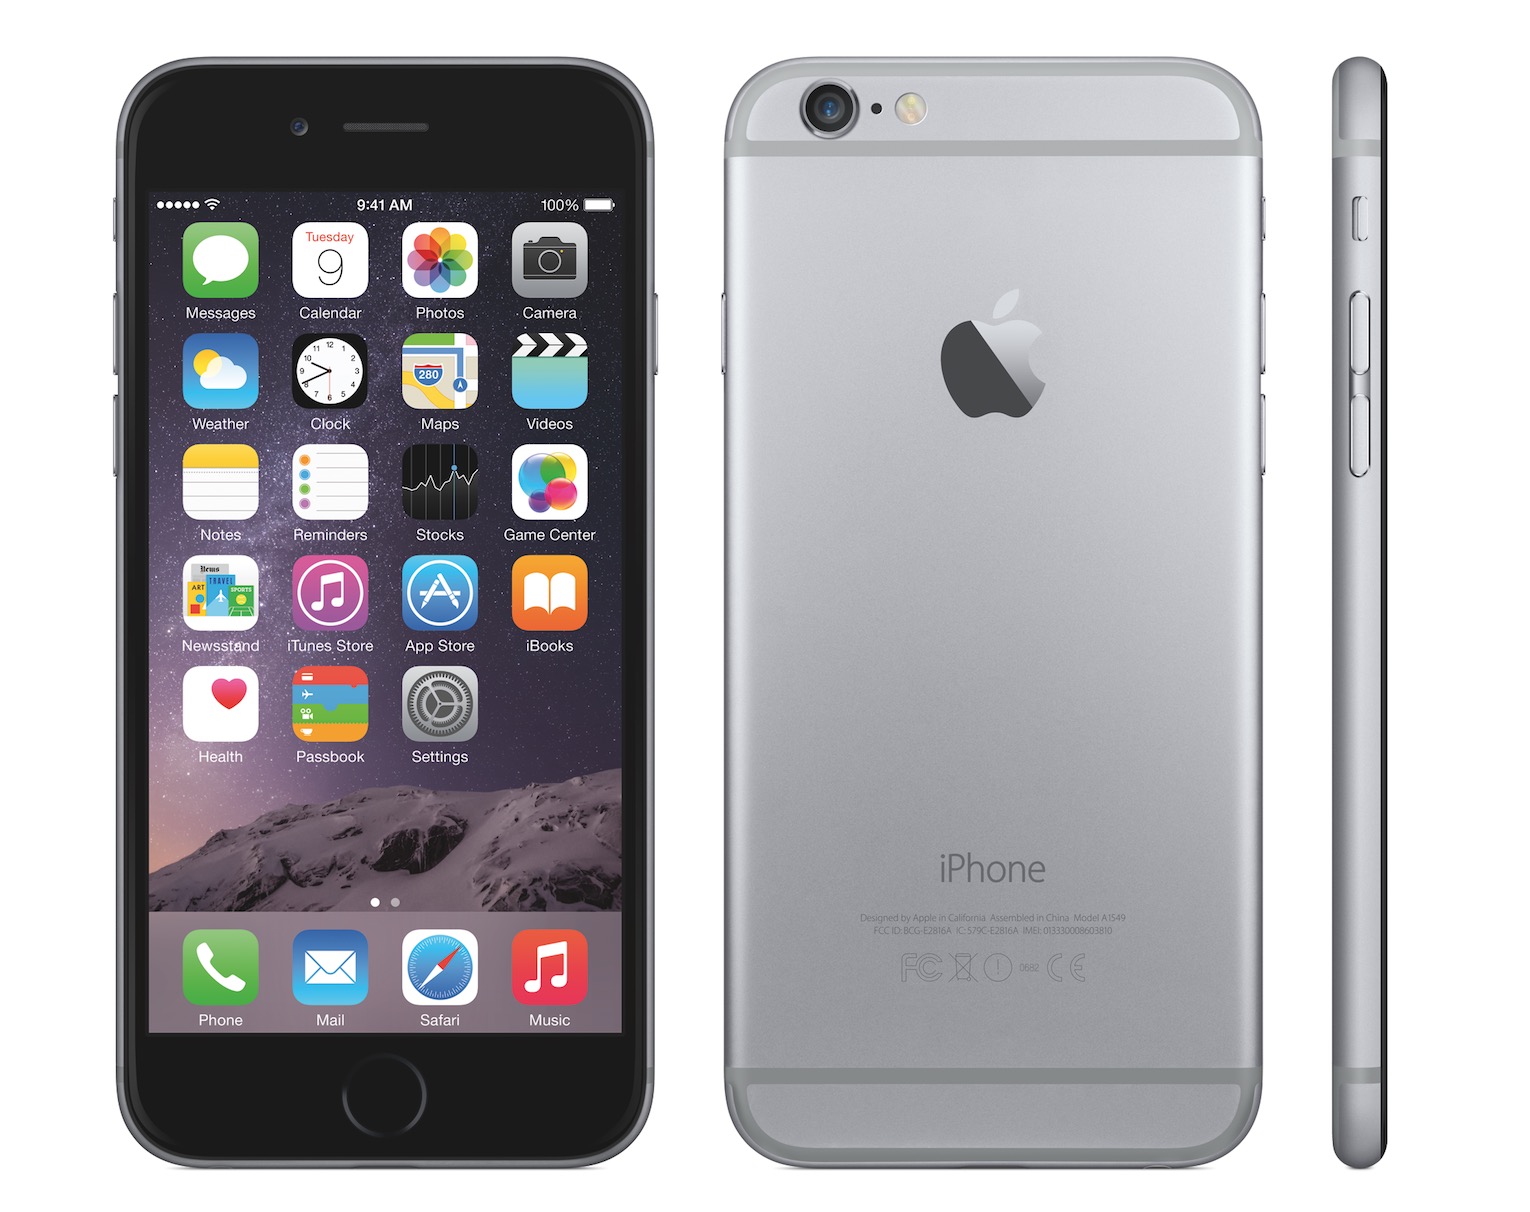 Here are the important Verizon iPhone 6 details.